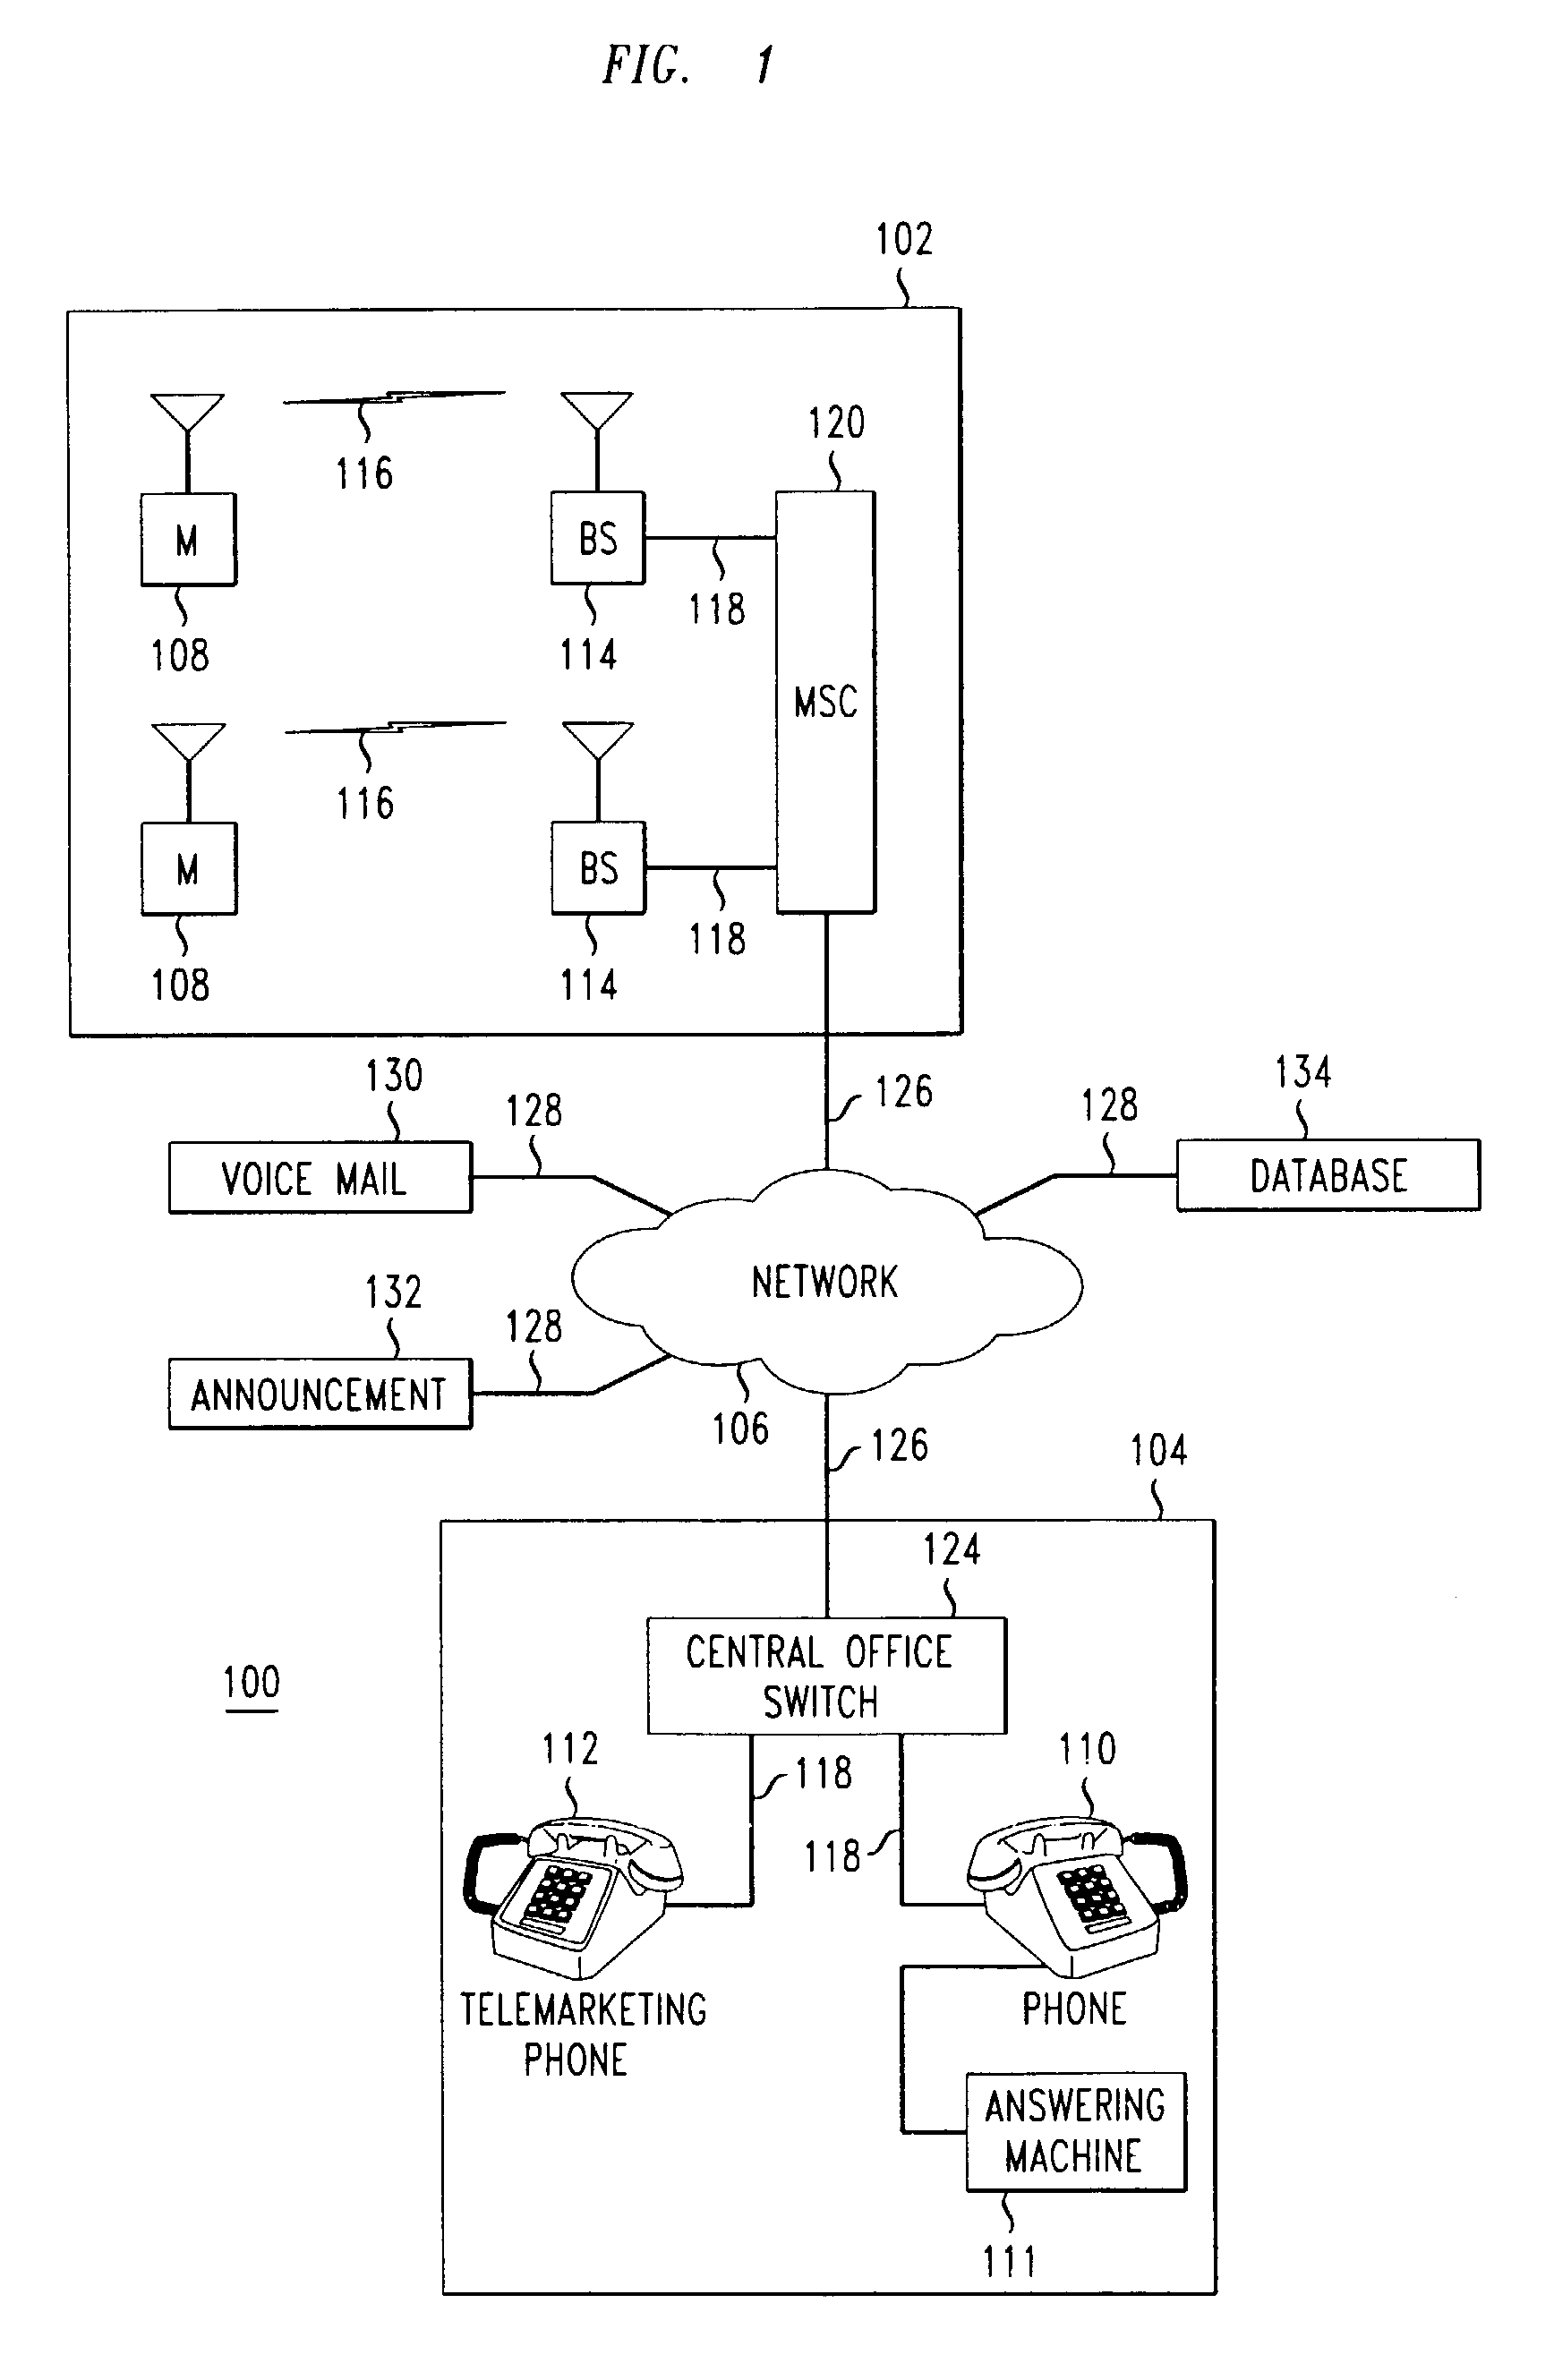 Methods for blocking repeated occurrences of nuisance calls